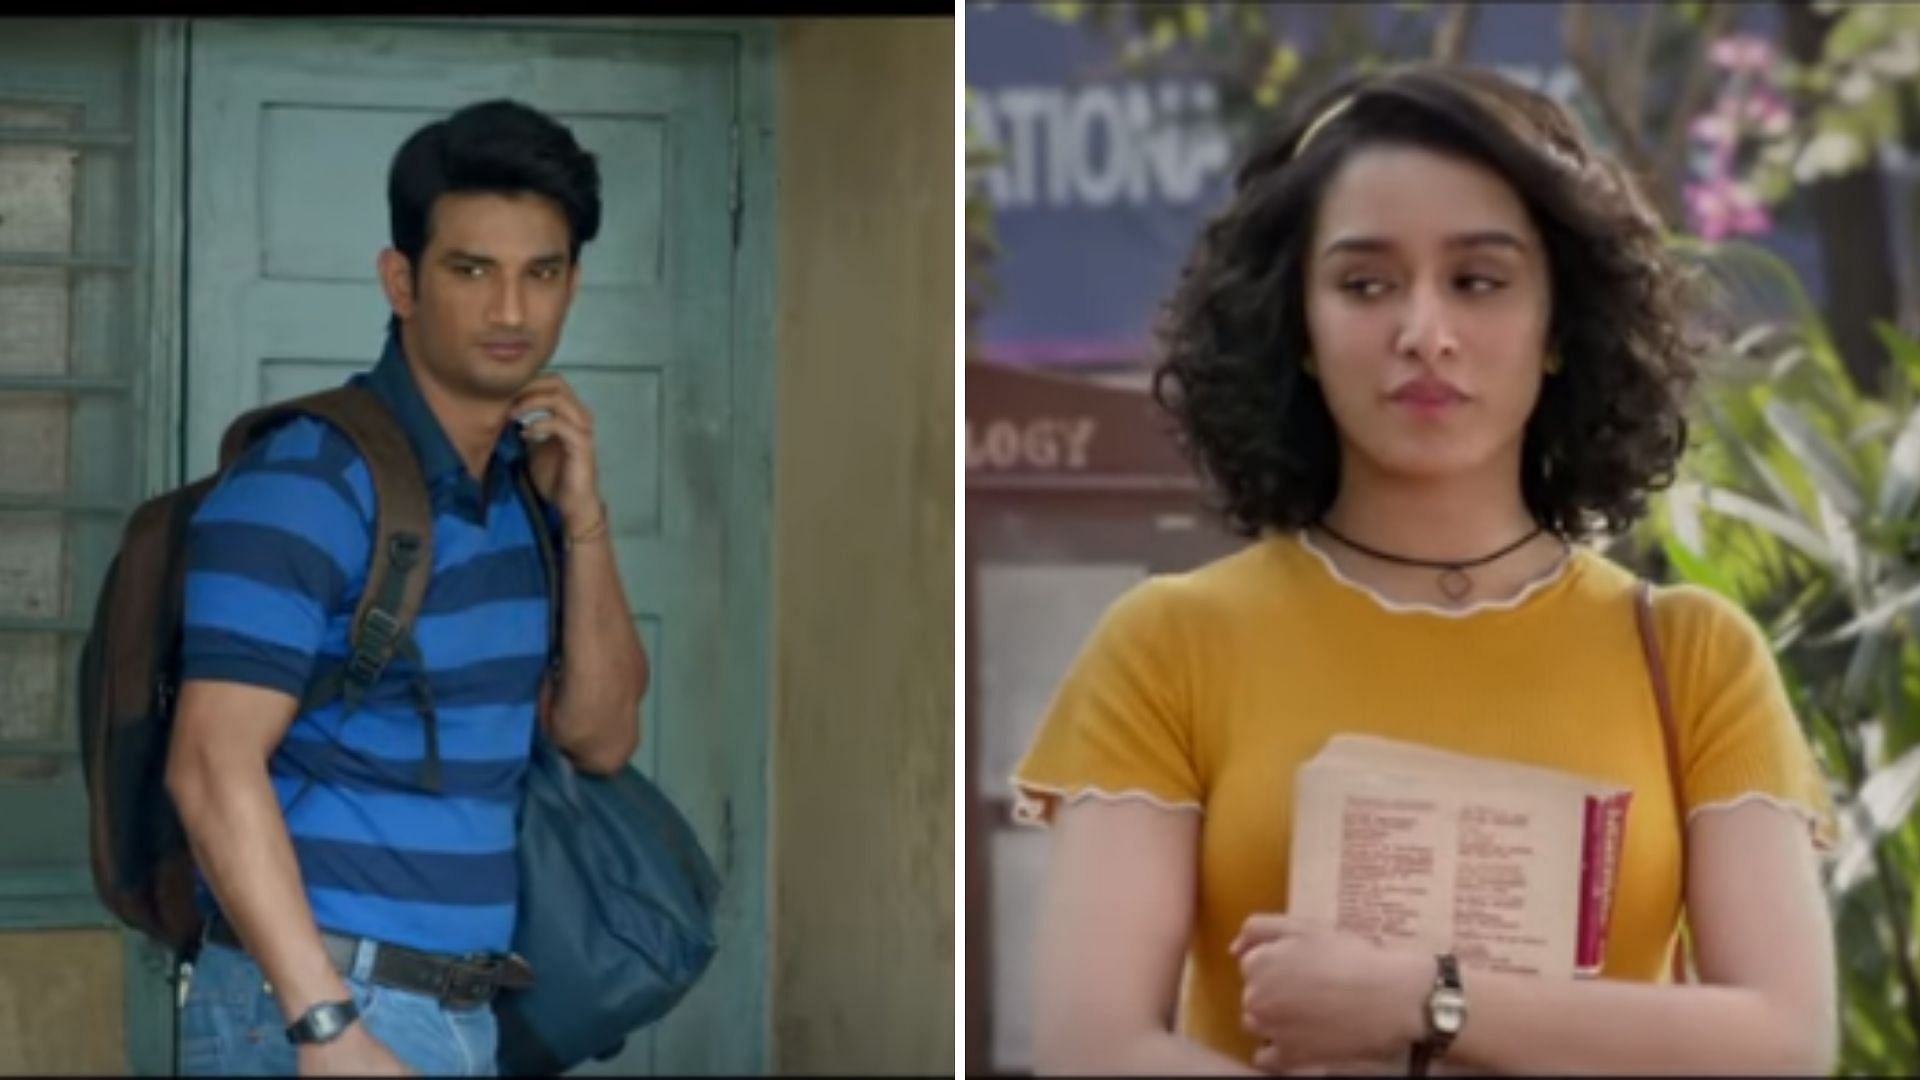 Sushant Singh Rajput and Shraddha Kapoor play college friends in <i>Chhichhore.</i>